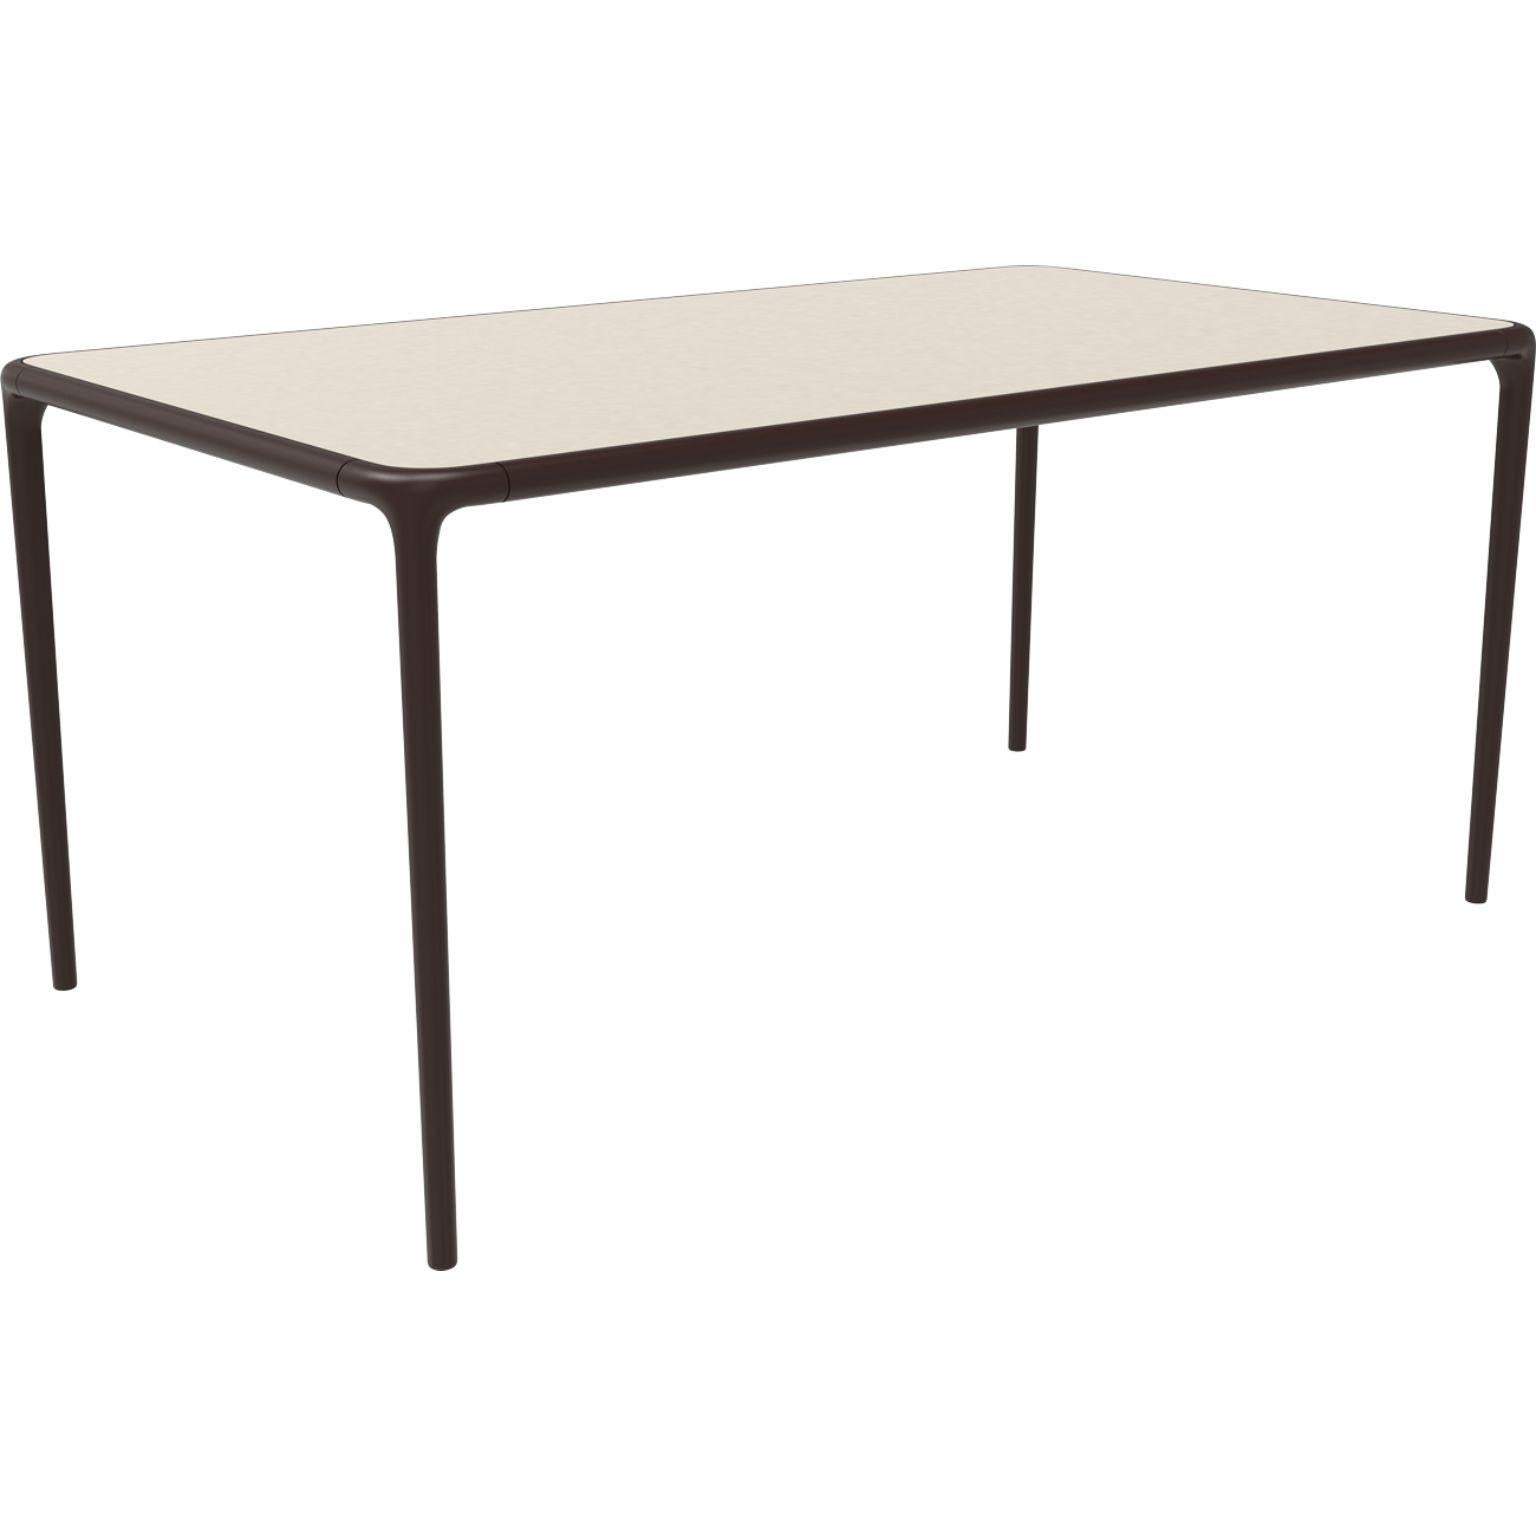 Xaloc chocolate glass top table 160 by MOWEE
Dimensions: D160 x W90 x H74 cm
Material: Aluminum, tinted tempered glass top.
Also available in different aluminum colors and finishes (HPL Black Edge or Neolith). 

 Xaloc synthesizes the lines of